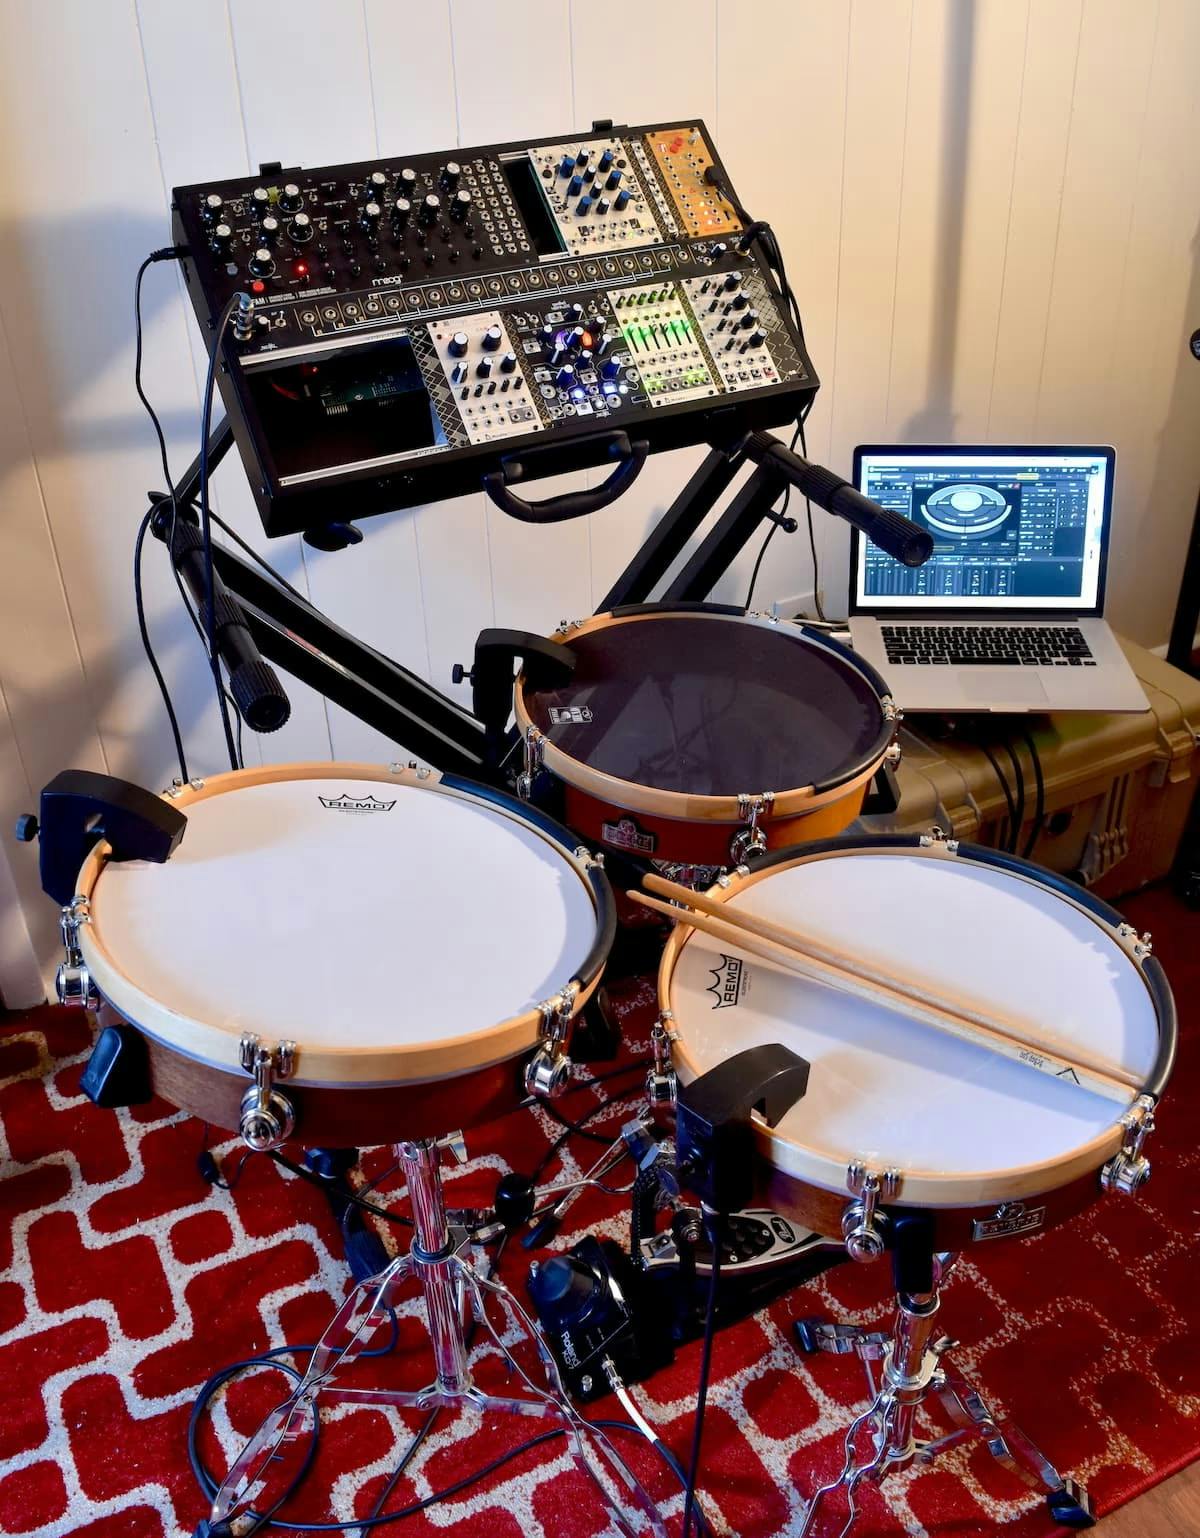 Three very shallow drums outfitted with Sunhouse sensors and arranged in a triangle, a Eurorack style synth filled with modules is in the background behind and above the drums, as is a laptop with Sensory Percussion software visible onscreen